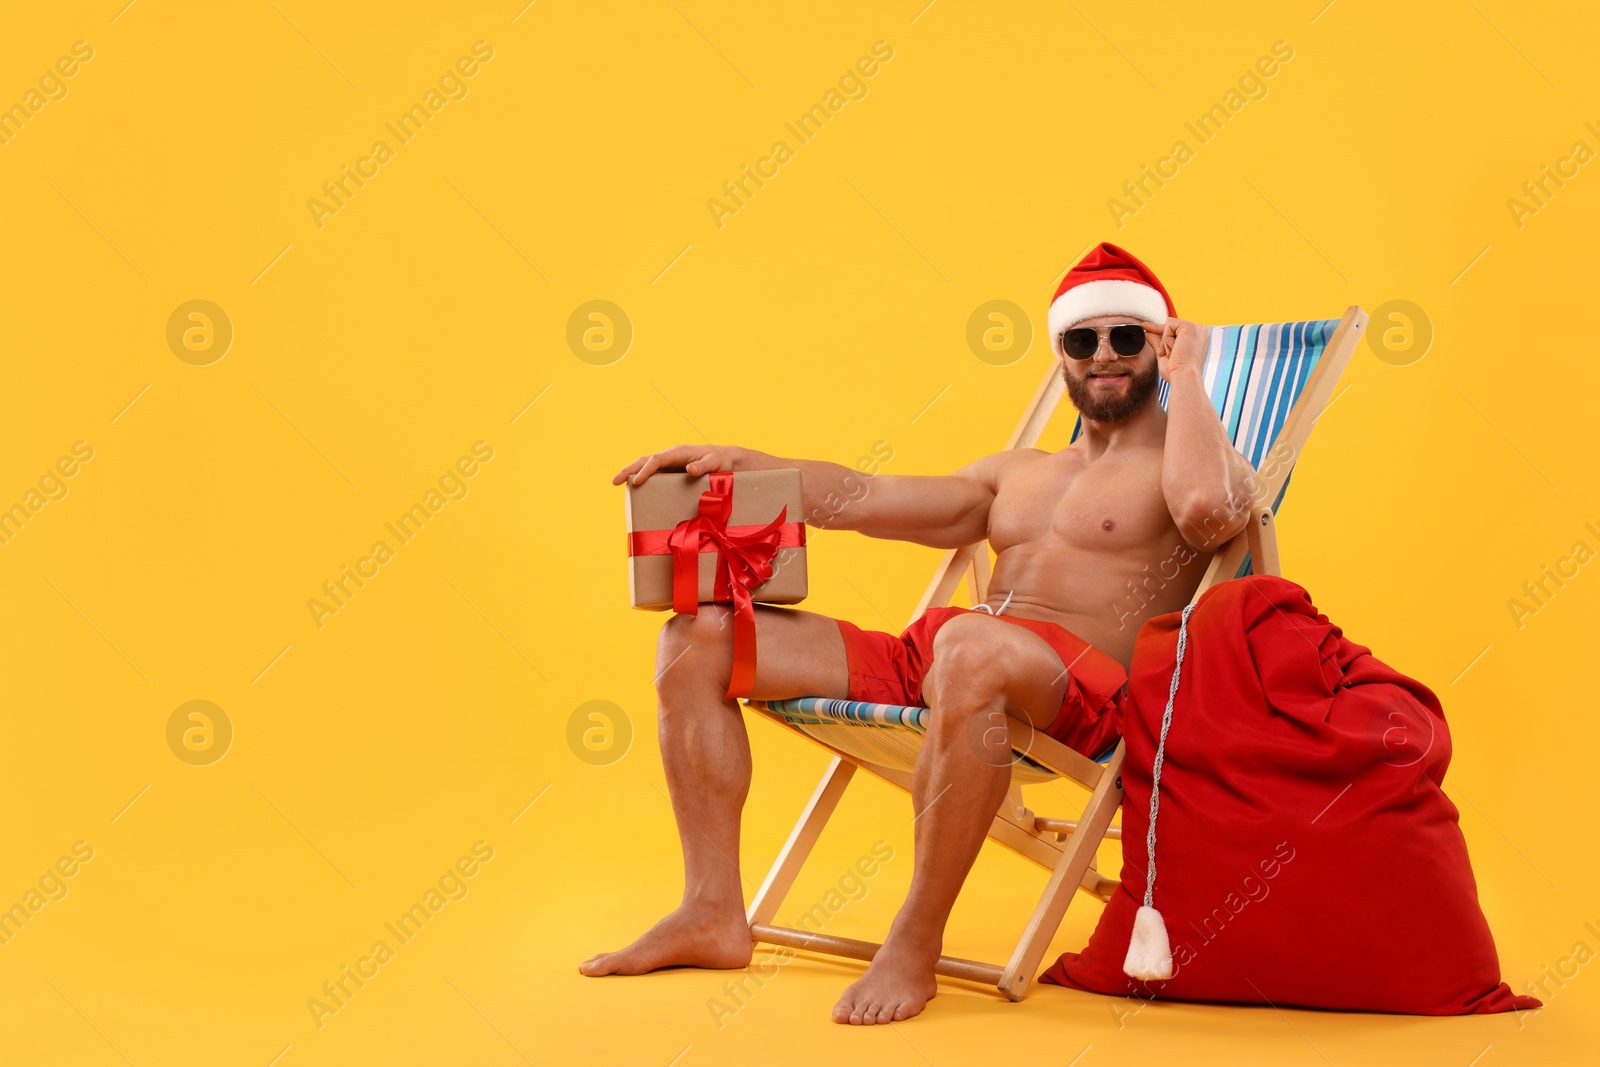 Photo of Muscular young man in Santa hat with deck chair, bag, sunglasses and Christmas gift box on orange background, space for text